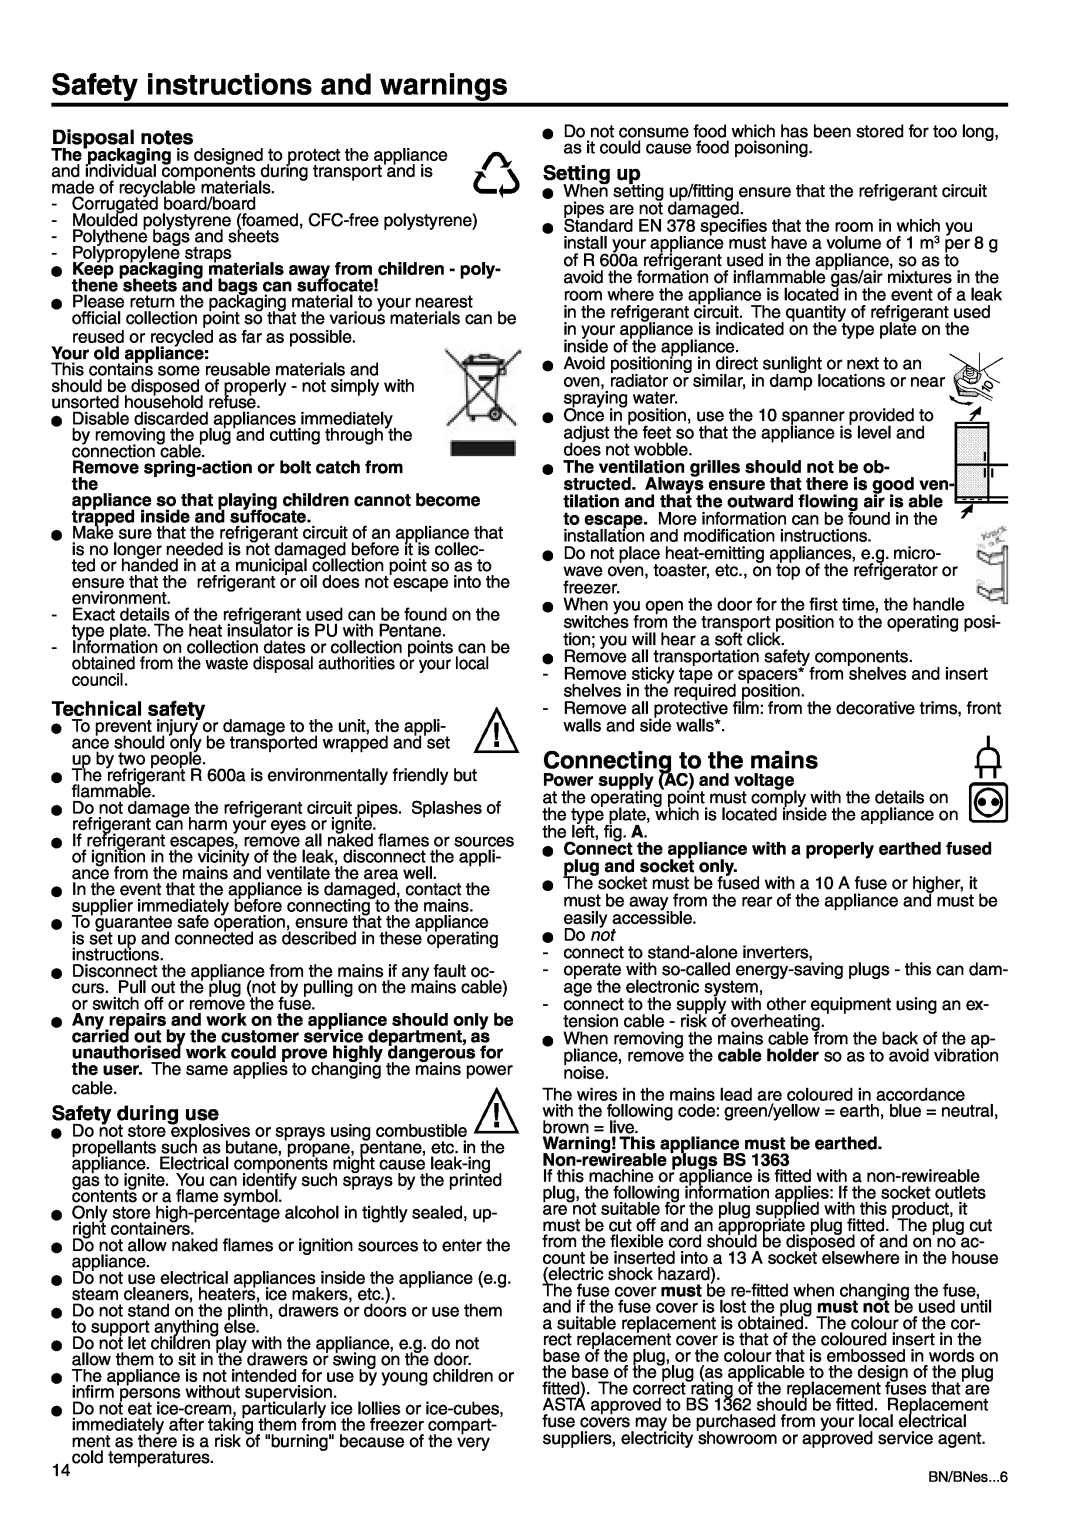 Liebherr 7082 218-03 manual Safety instructions and warnings, Connecting to the mains, Disposal notes, Technical safety 